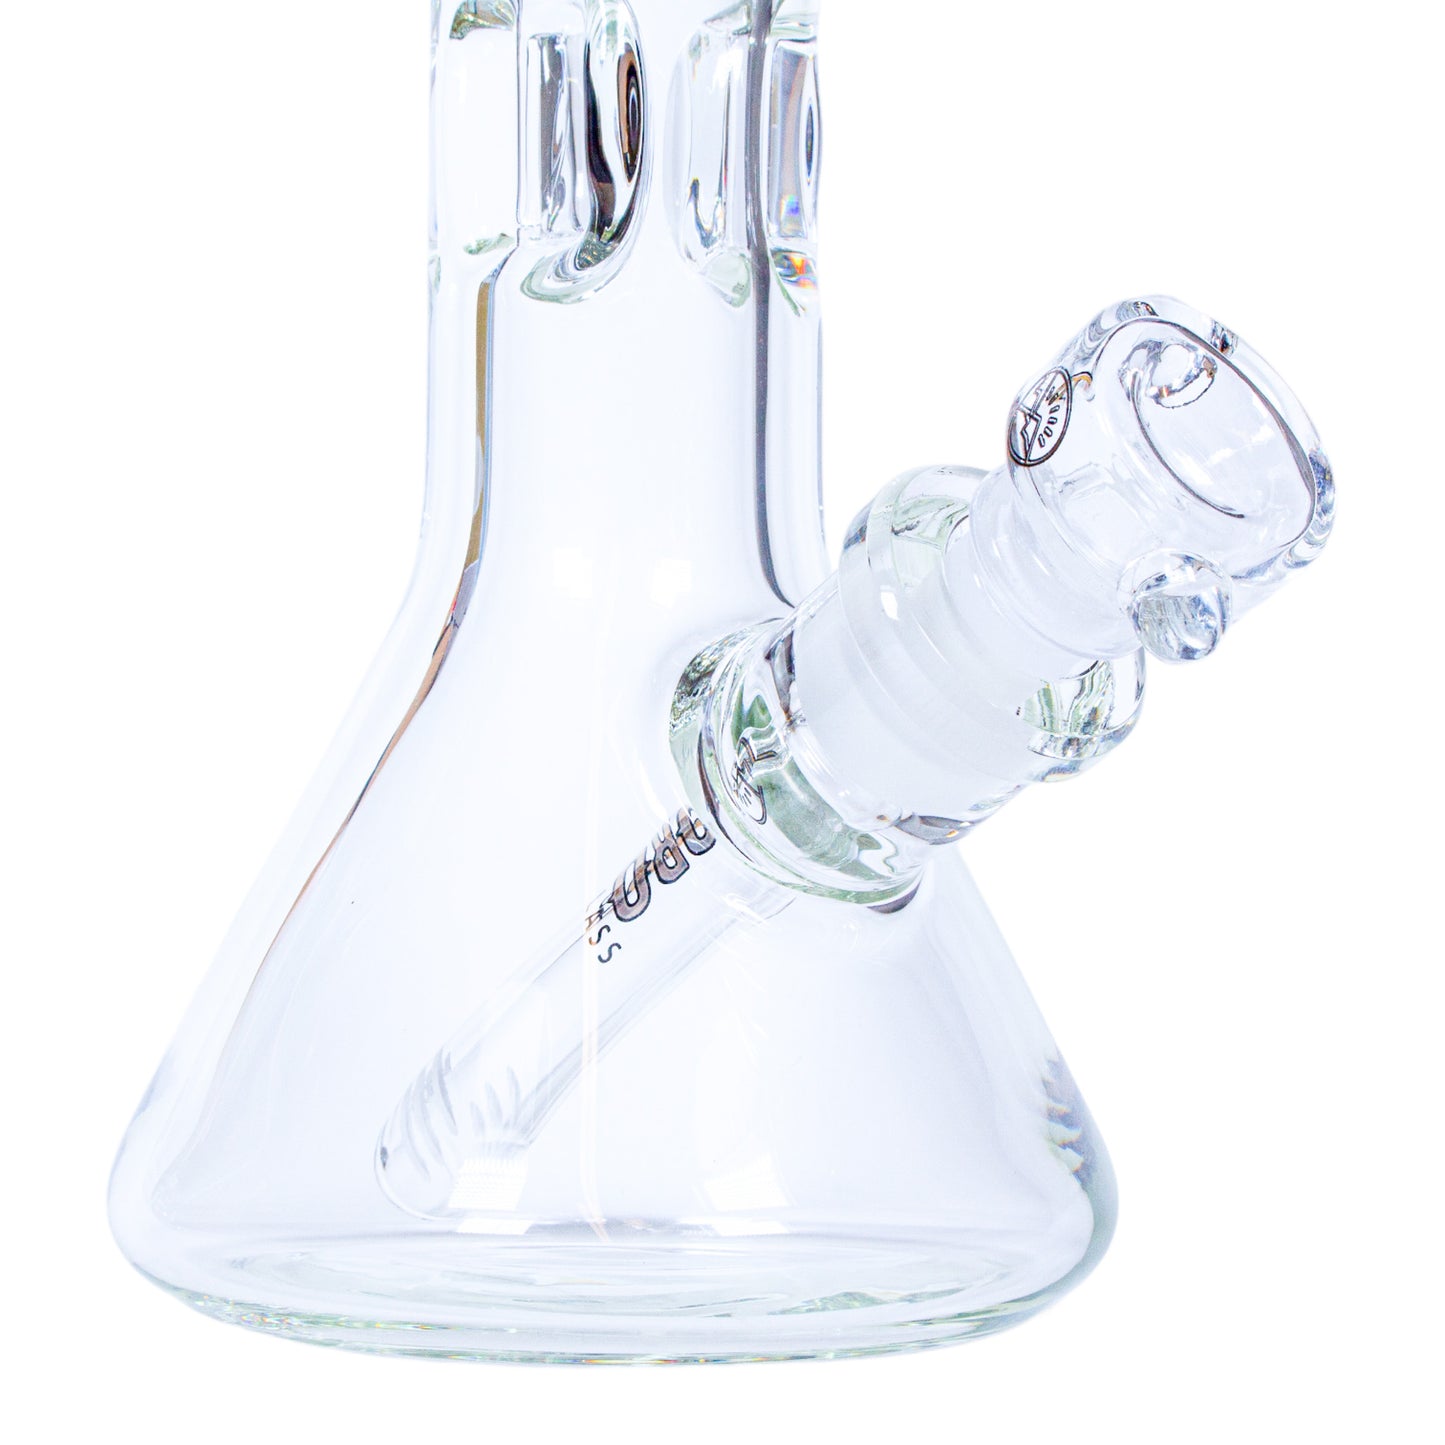 A 14mm Oro Glass Company Clear Slide Bowl in an Oro Glass Company Thick Beaker Water Pipe.